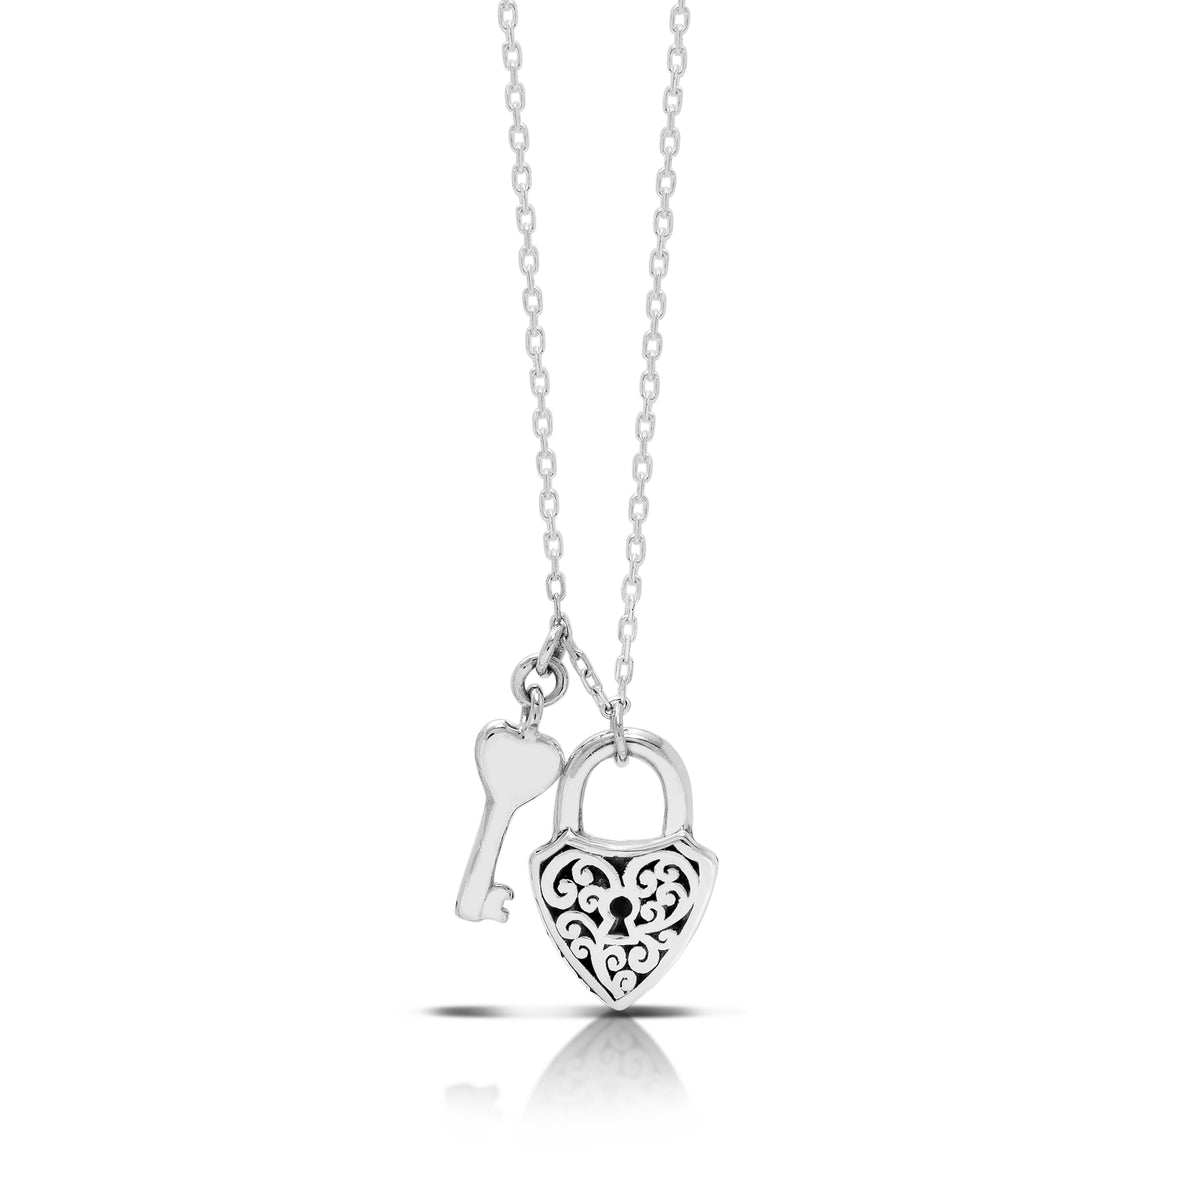 Classic Signature Scroll Shields Padlock Pendant with Hanging Key Necklace